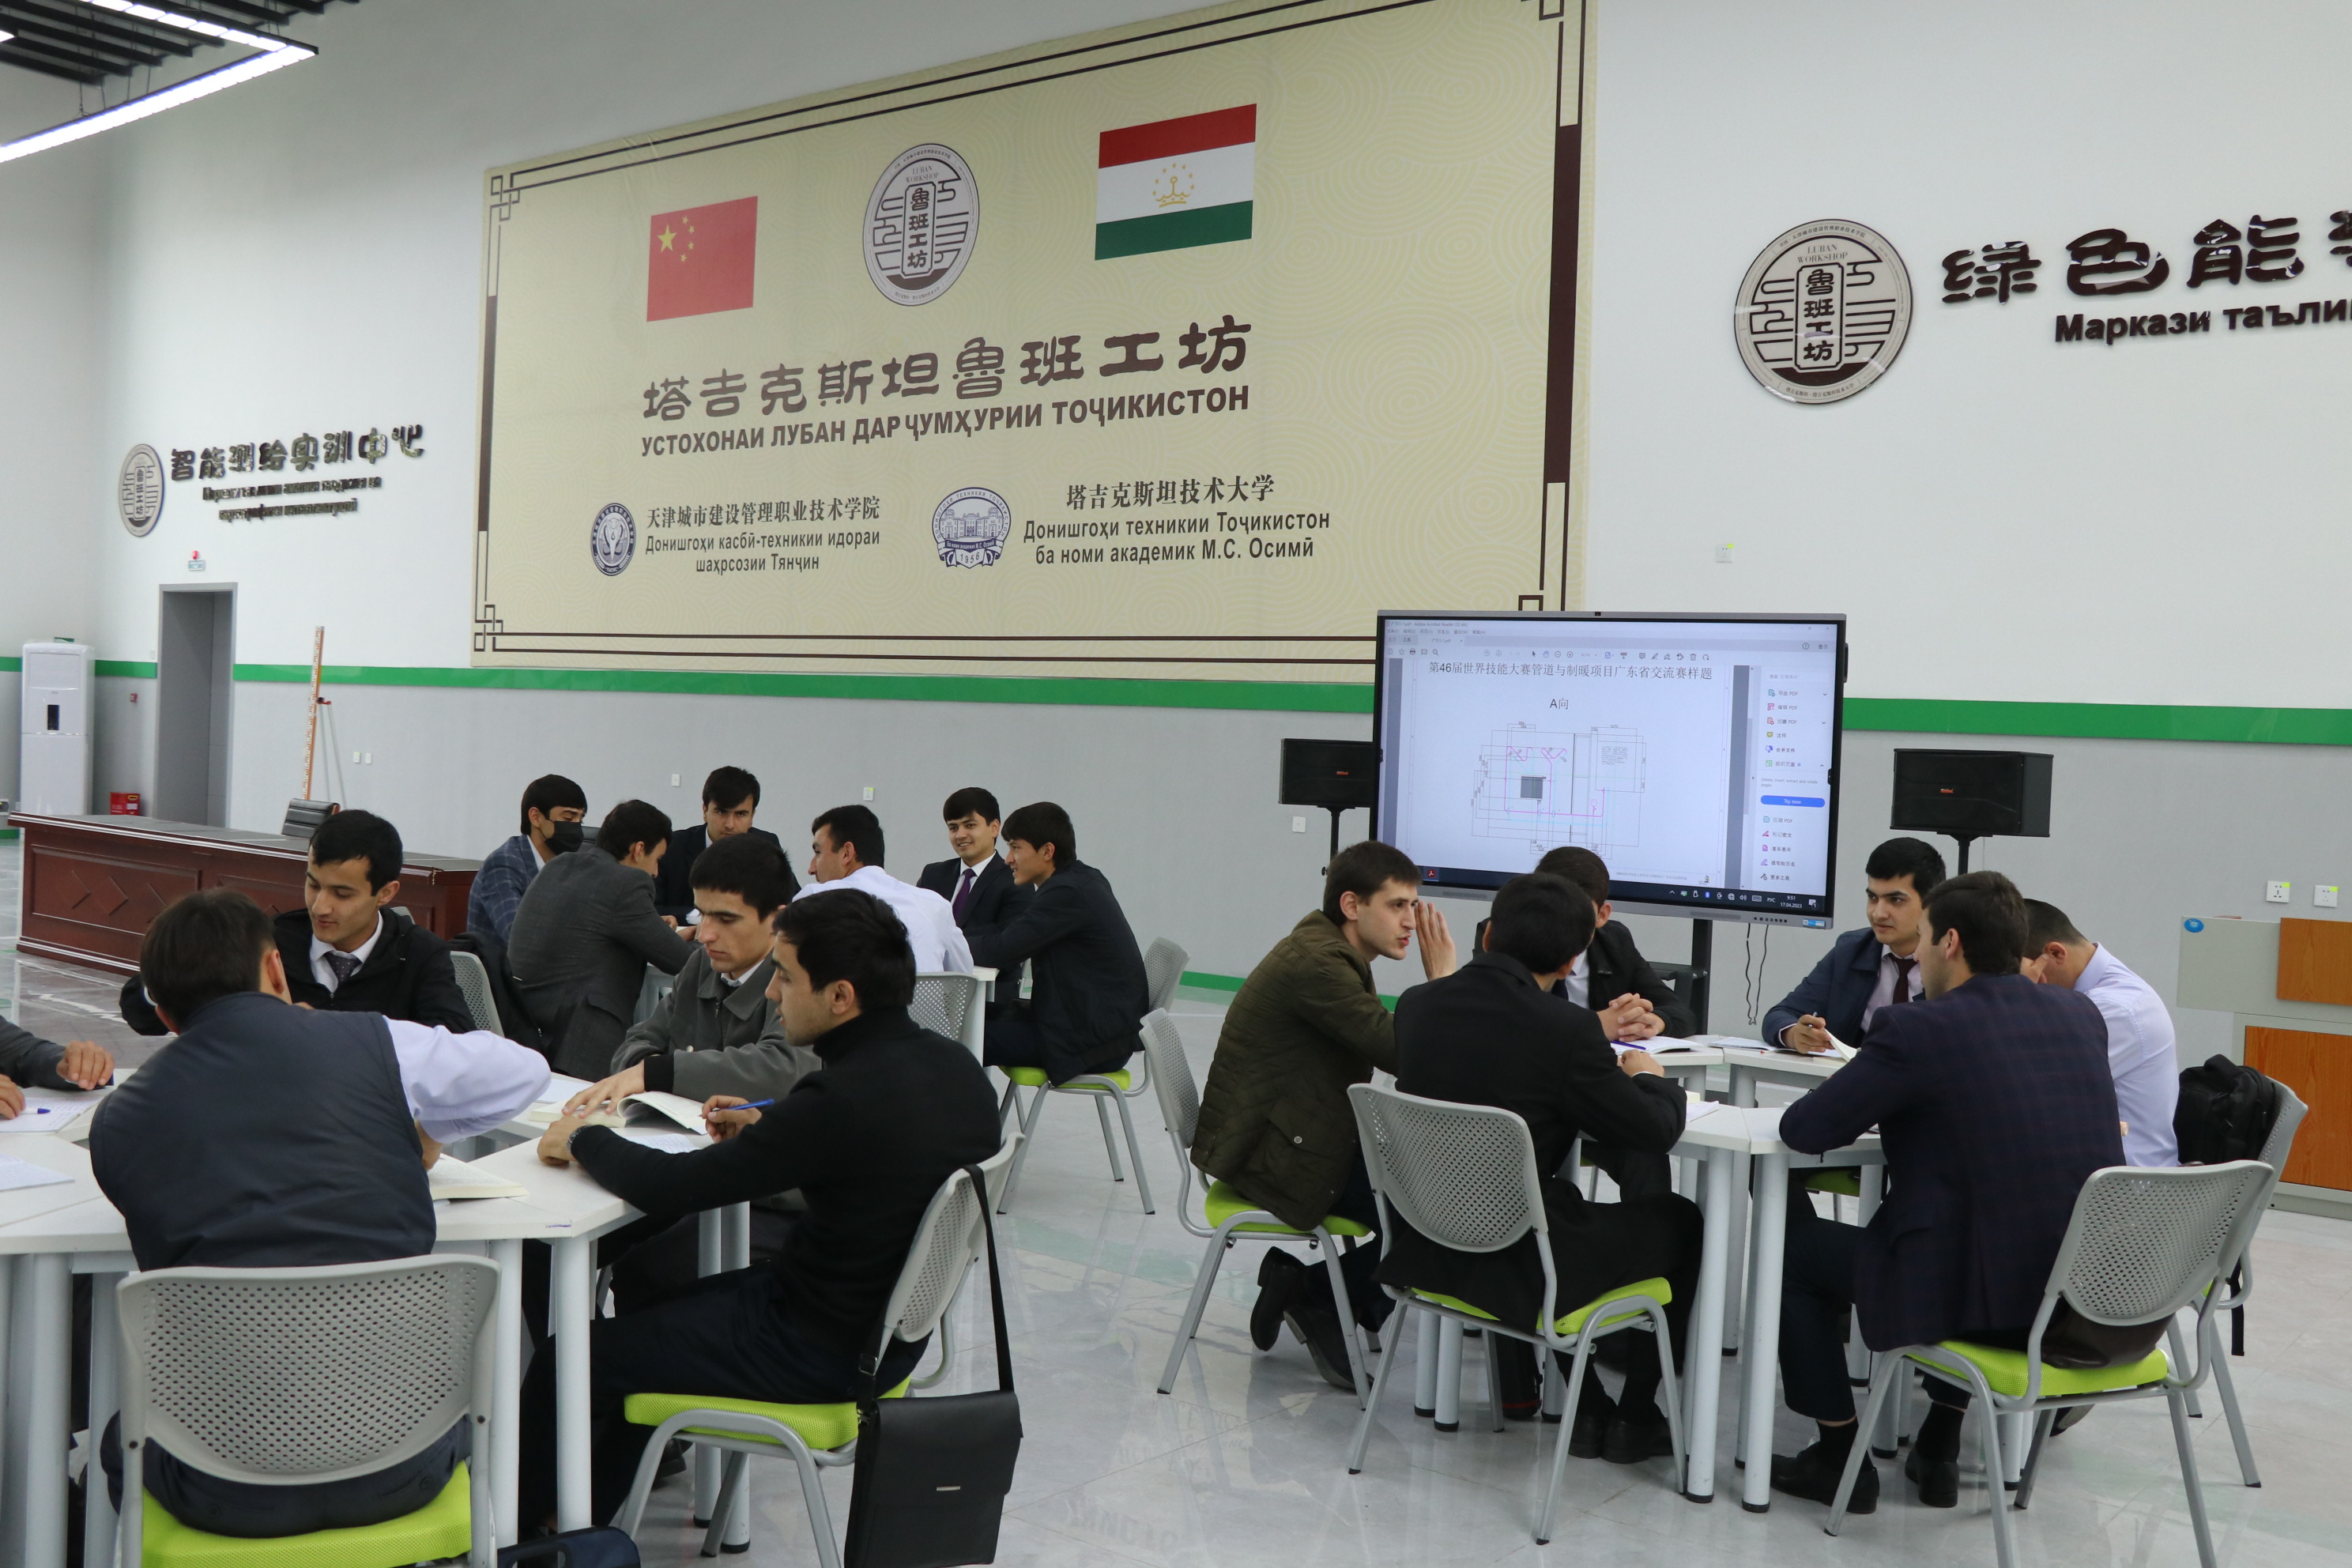 Students in Dushanbe, Tajikistan connect with Chinese students in Tianjin via Luban Workshops on April 17, 2023 in Dushanbe, Tajikistan. The workshops became a platform for vocational school students between the two countries to pair skills and make friends. /IC